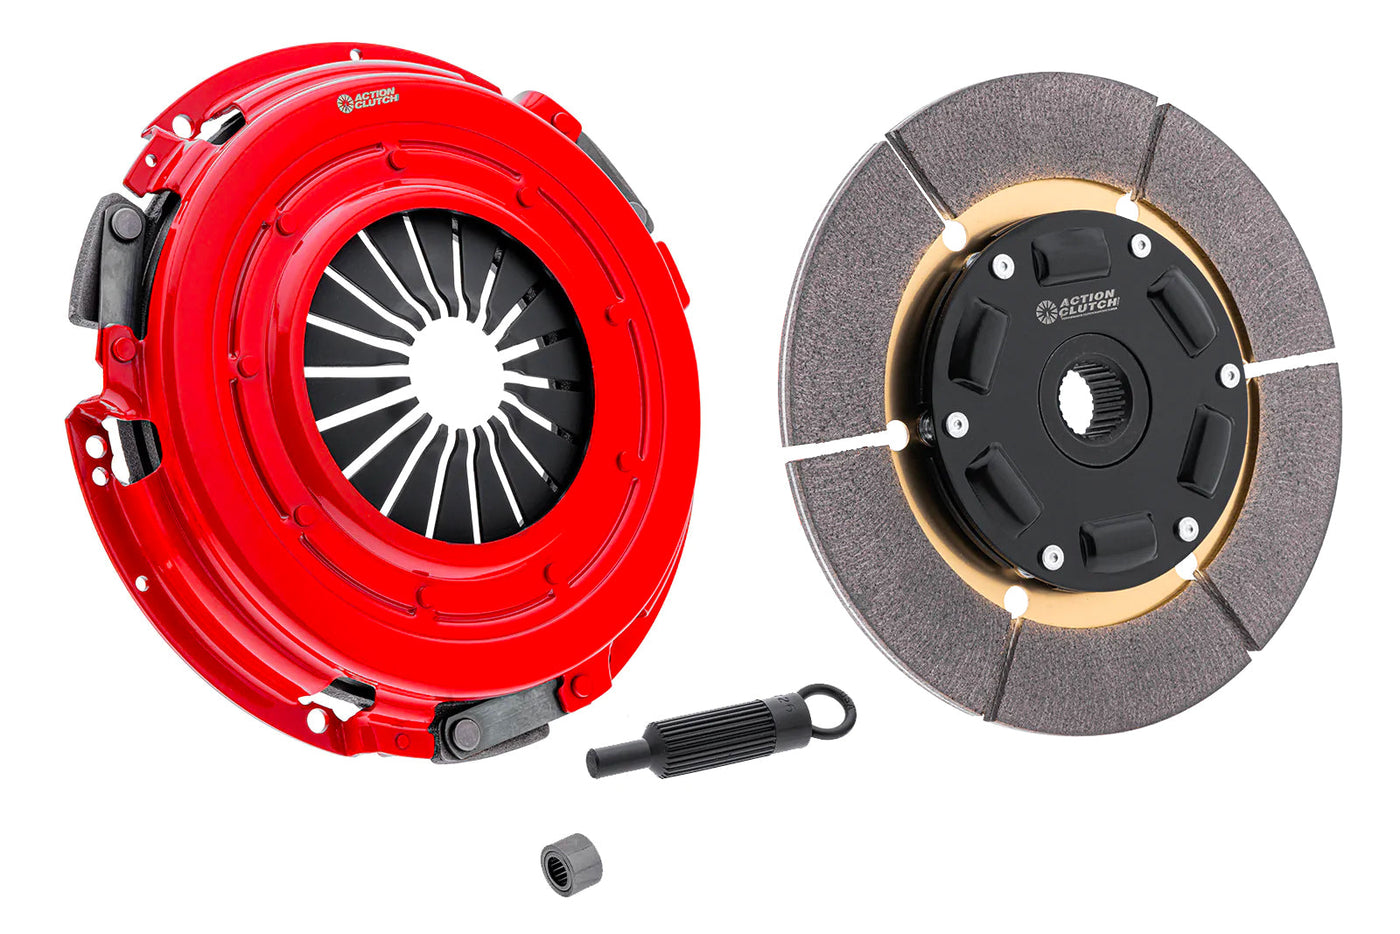 Ironman Sprung (Street) Clutch Kit for Chevrolet Camaro Z28-SS 1998-2002 5.7L (LS1) Without Slave and Release Bearing